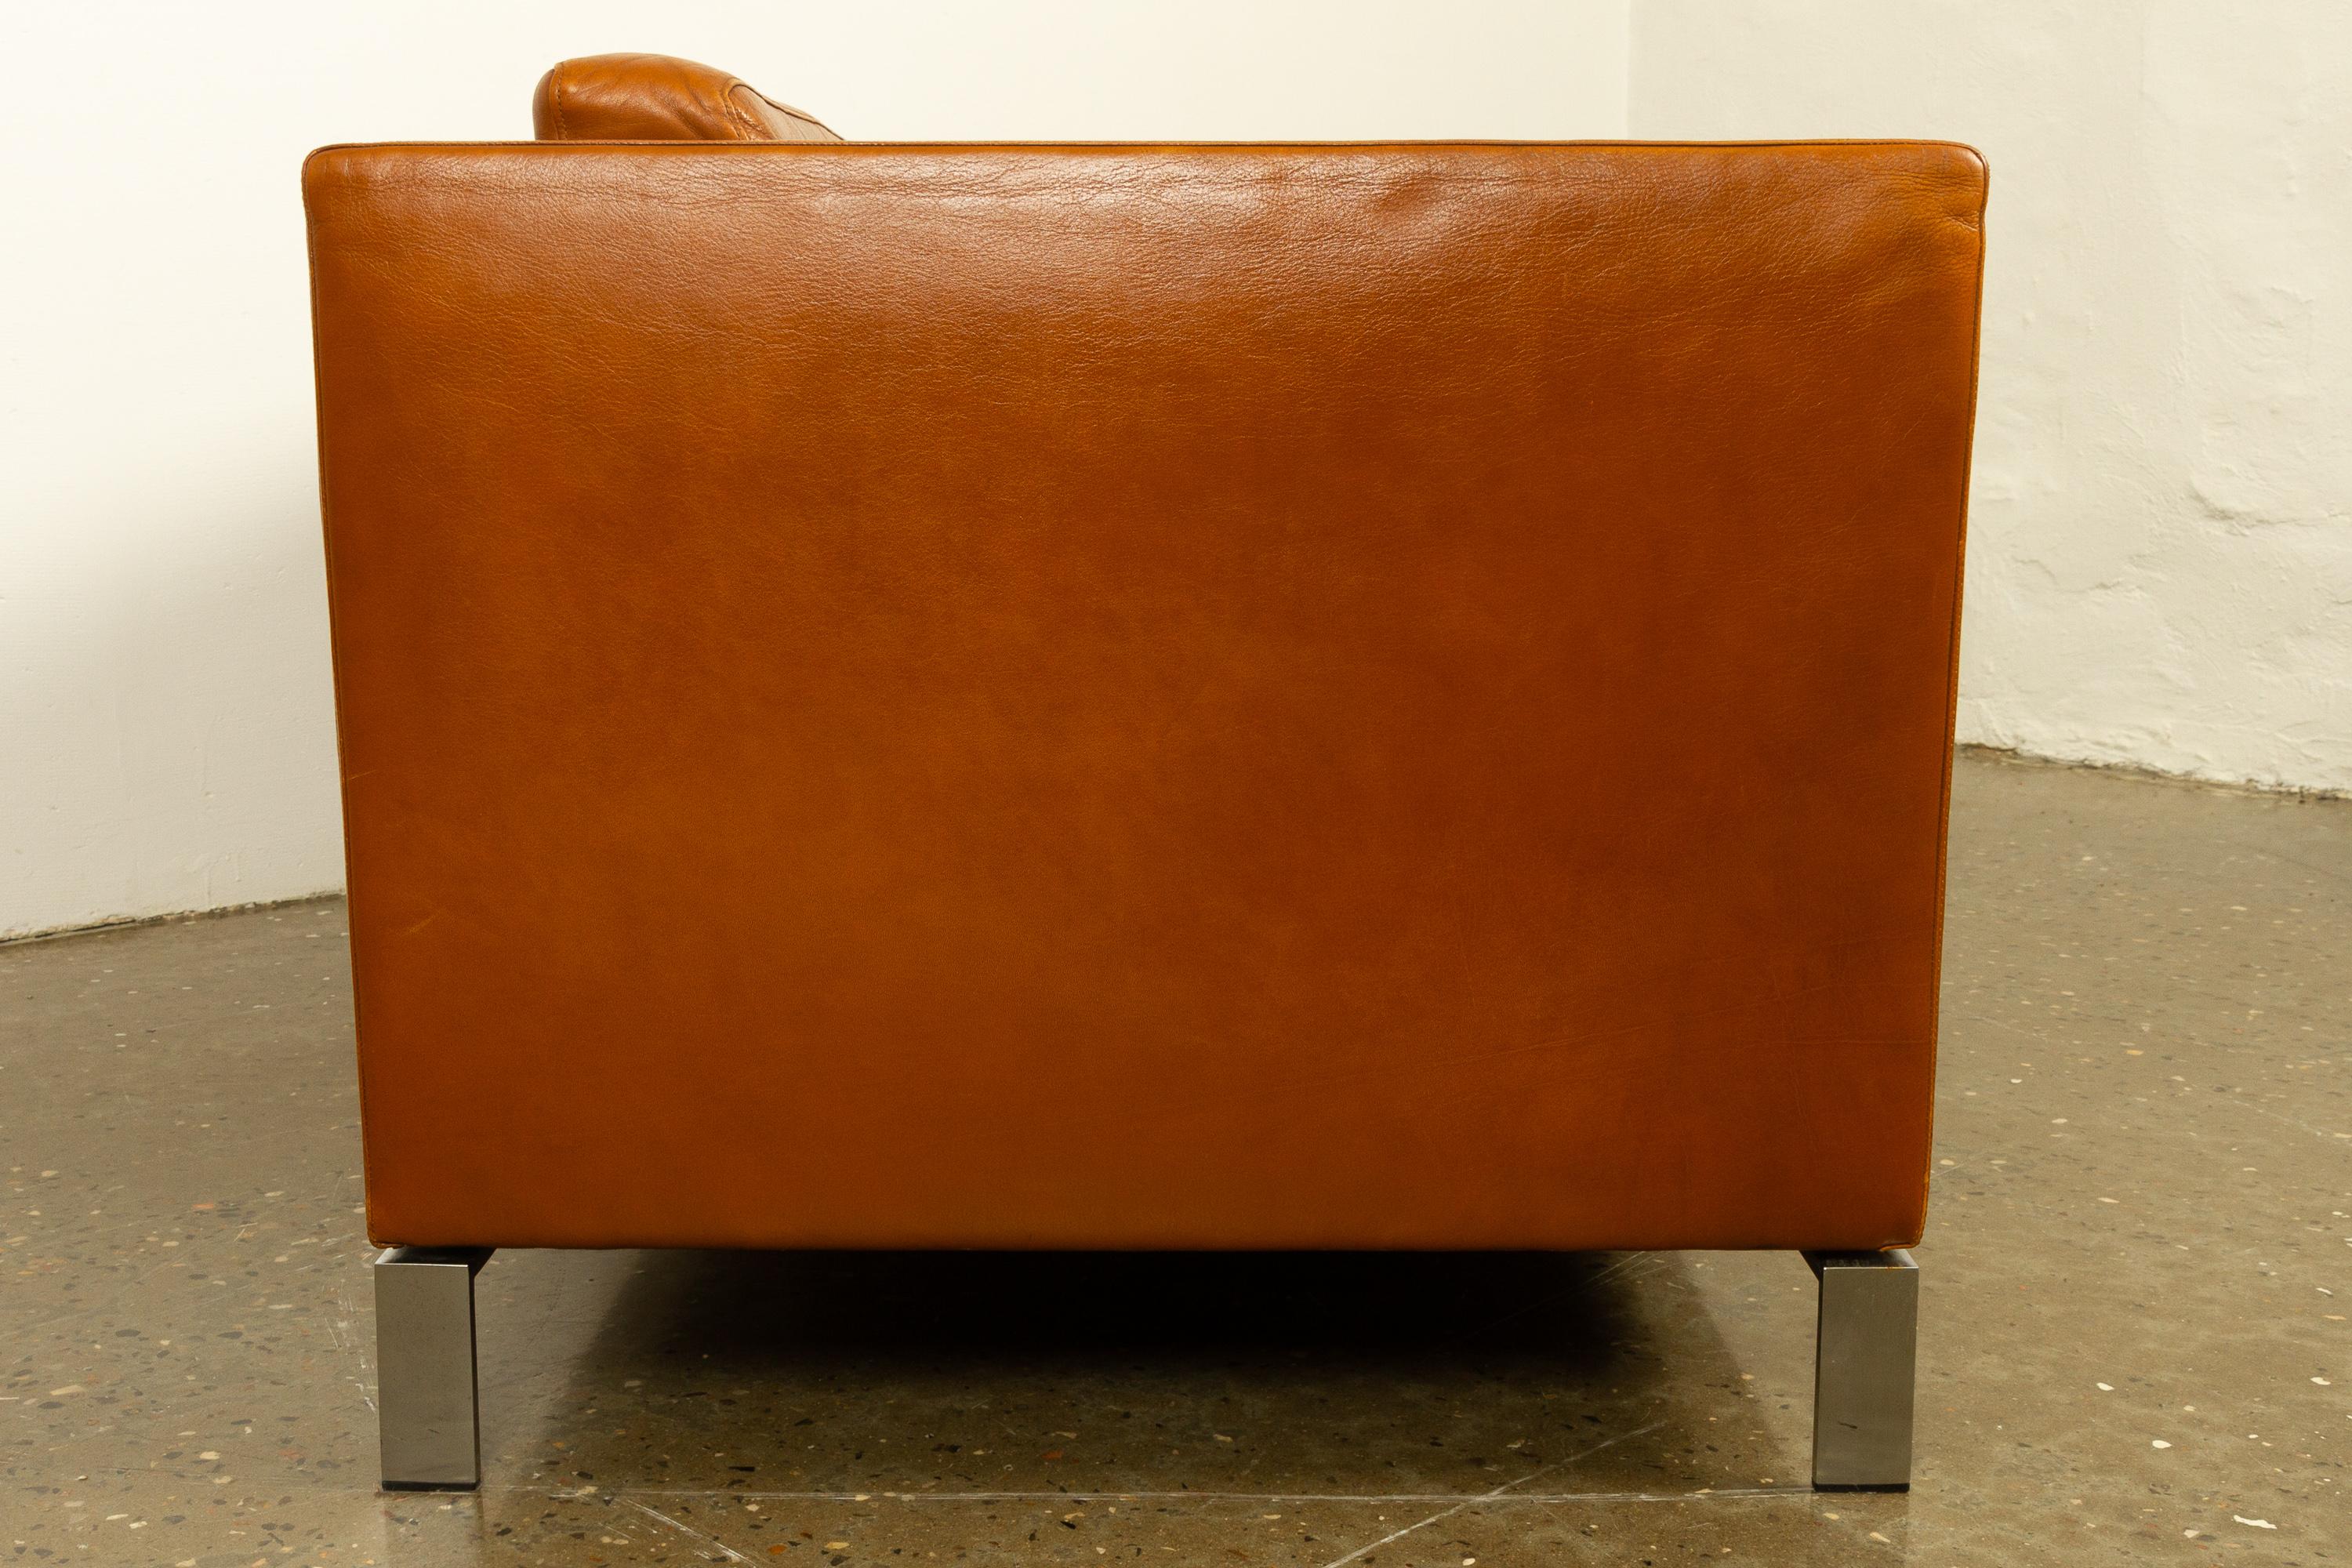 Norman Foster Living Room Set in Tan Leather for Walter Knoll, 2000s 2